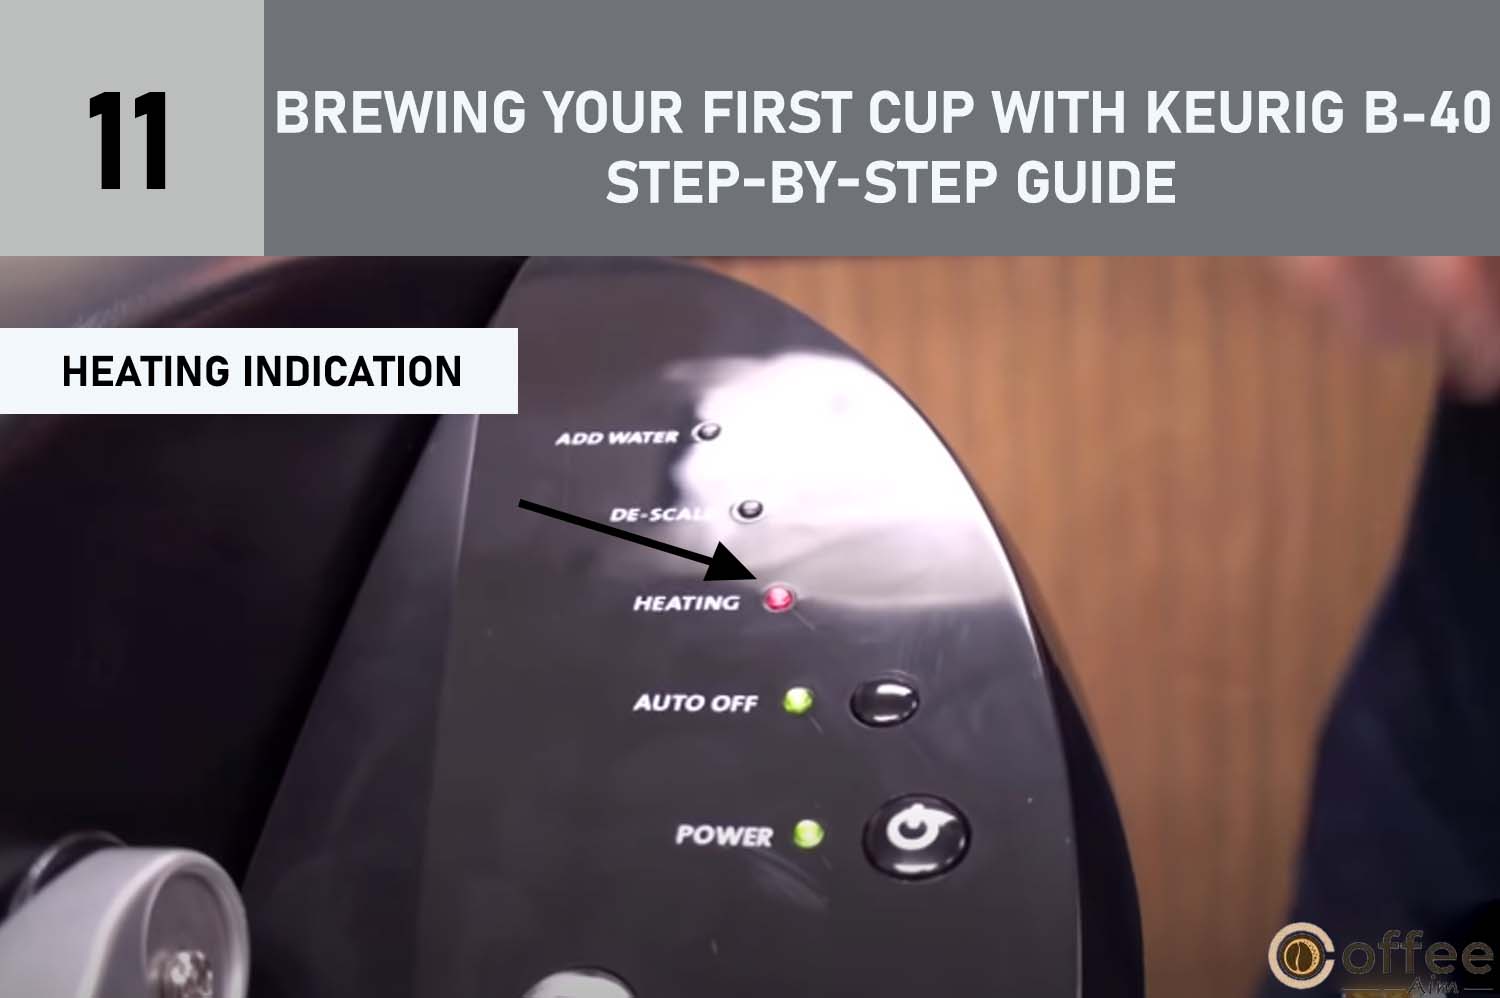 This image illustrates the "Heating Indication" as discussed in the section titled "Brewing Your First Cup with Keurig B-40: Step-by-Step Guide" within the article "How to Use Keurig B-40."